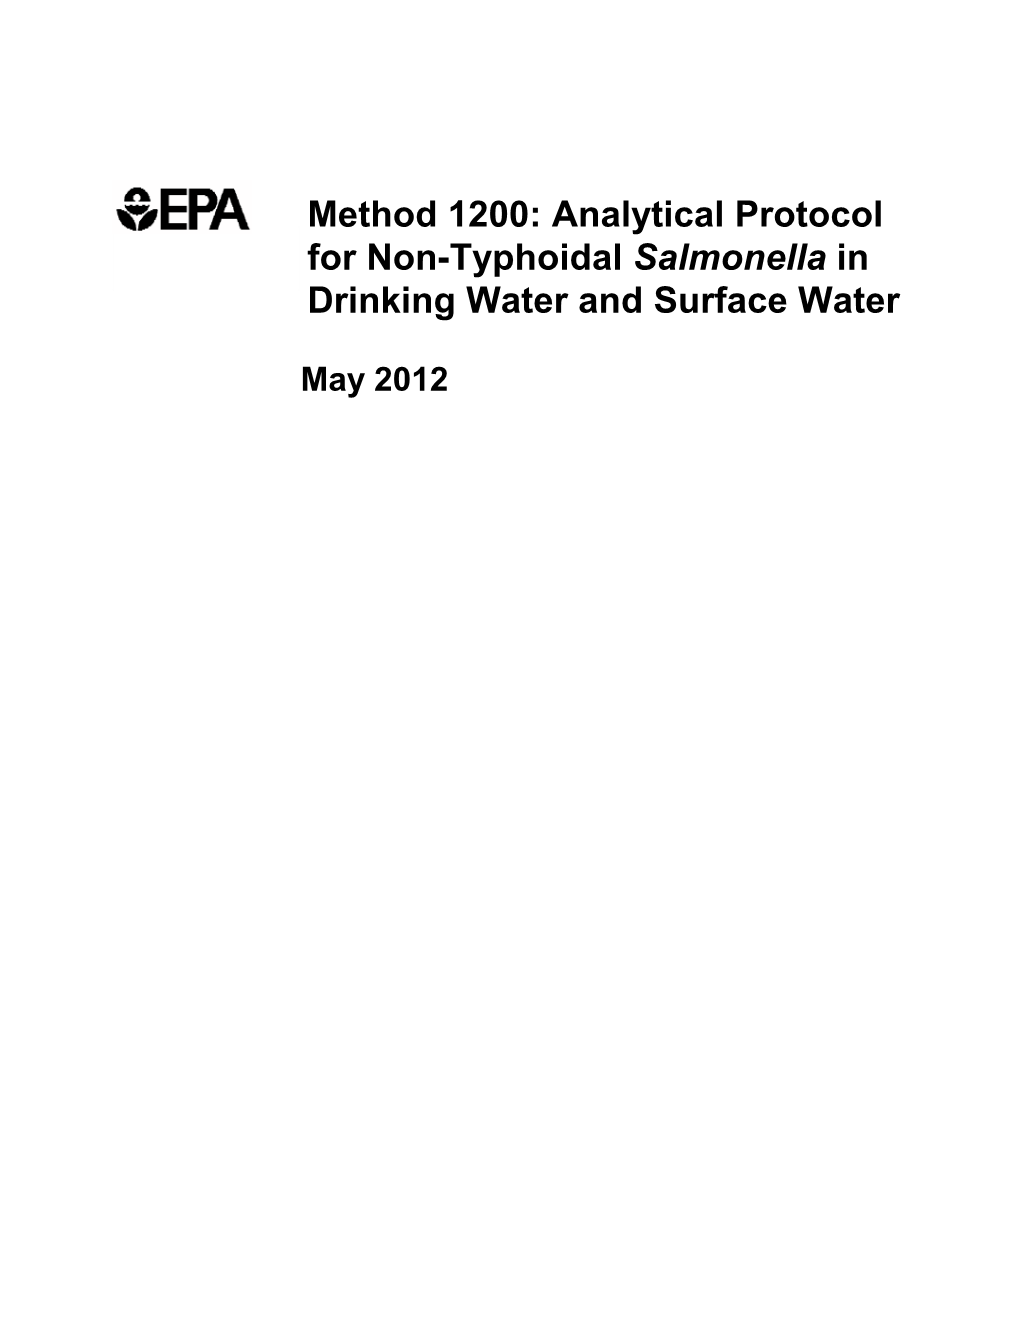 Analytical Protocol for Non-Typhoidal Salmonella in Drinking Water and Surface Water